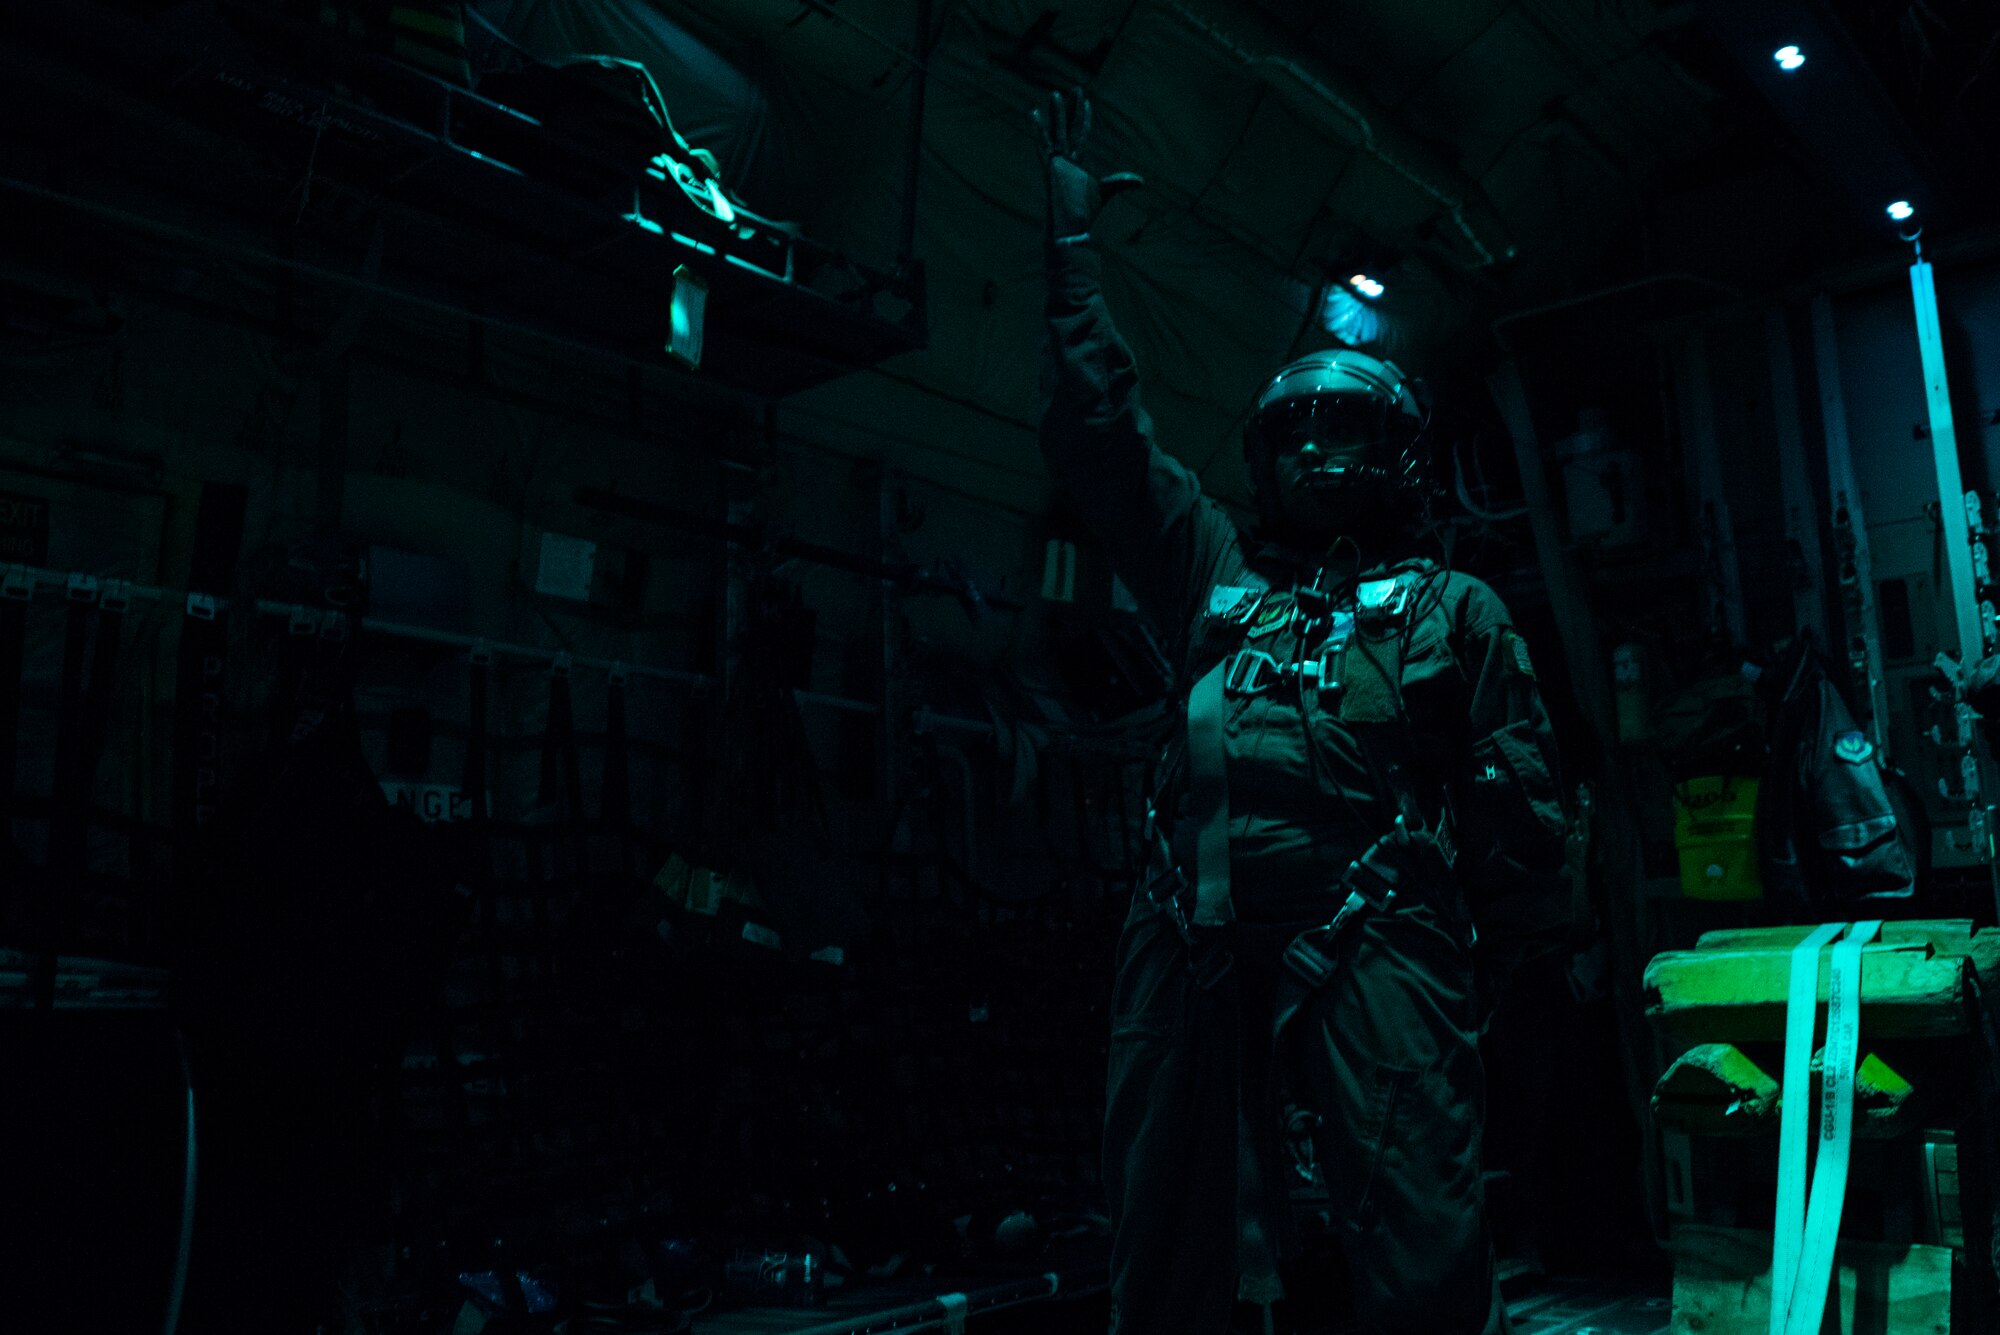 U.S. Air Force Staff Sgt. Crystal Reese, 37th Airlift Squadron C-130J Super Hercules loadmaster, stands ready to conduct a cargo delivery system equipment drop during a nighttime sortie over a drop zone in Germany, Nov. 8, 2018. Reese was responsible for verifying the cargo left the aircraft without issue and at the allotted time. (U.S. Air Force photo by Senior Airman Devin M. Rumbaugh)